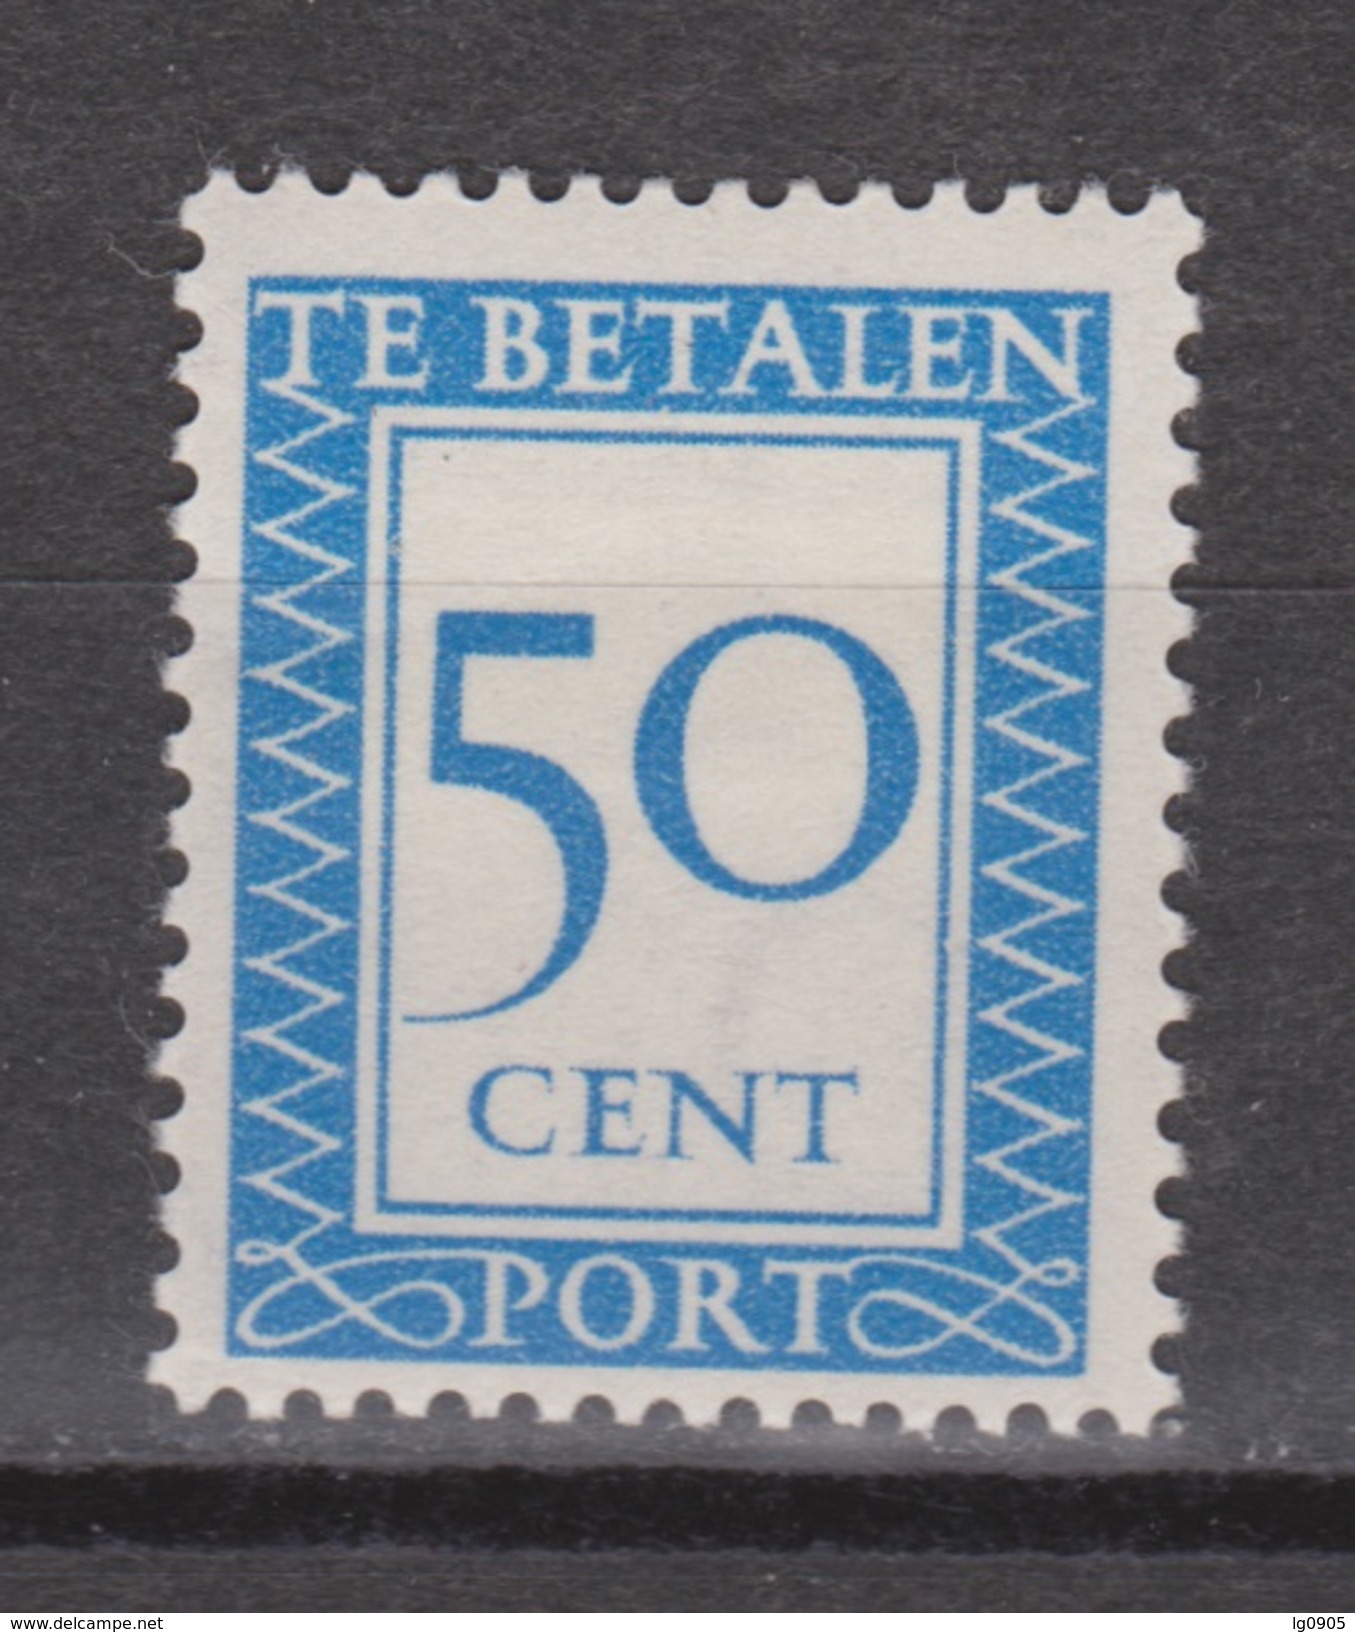 NVPH Nederland Netherlands Holanda Pays Bas Port 100 MLH Timbre-taxe Postmarke Sellos De Correos NOW MANY DUE STAMPS - Postage Due